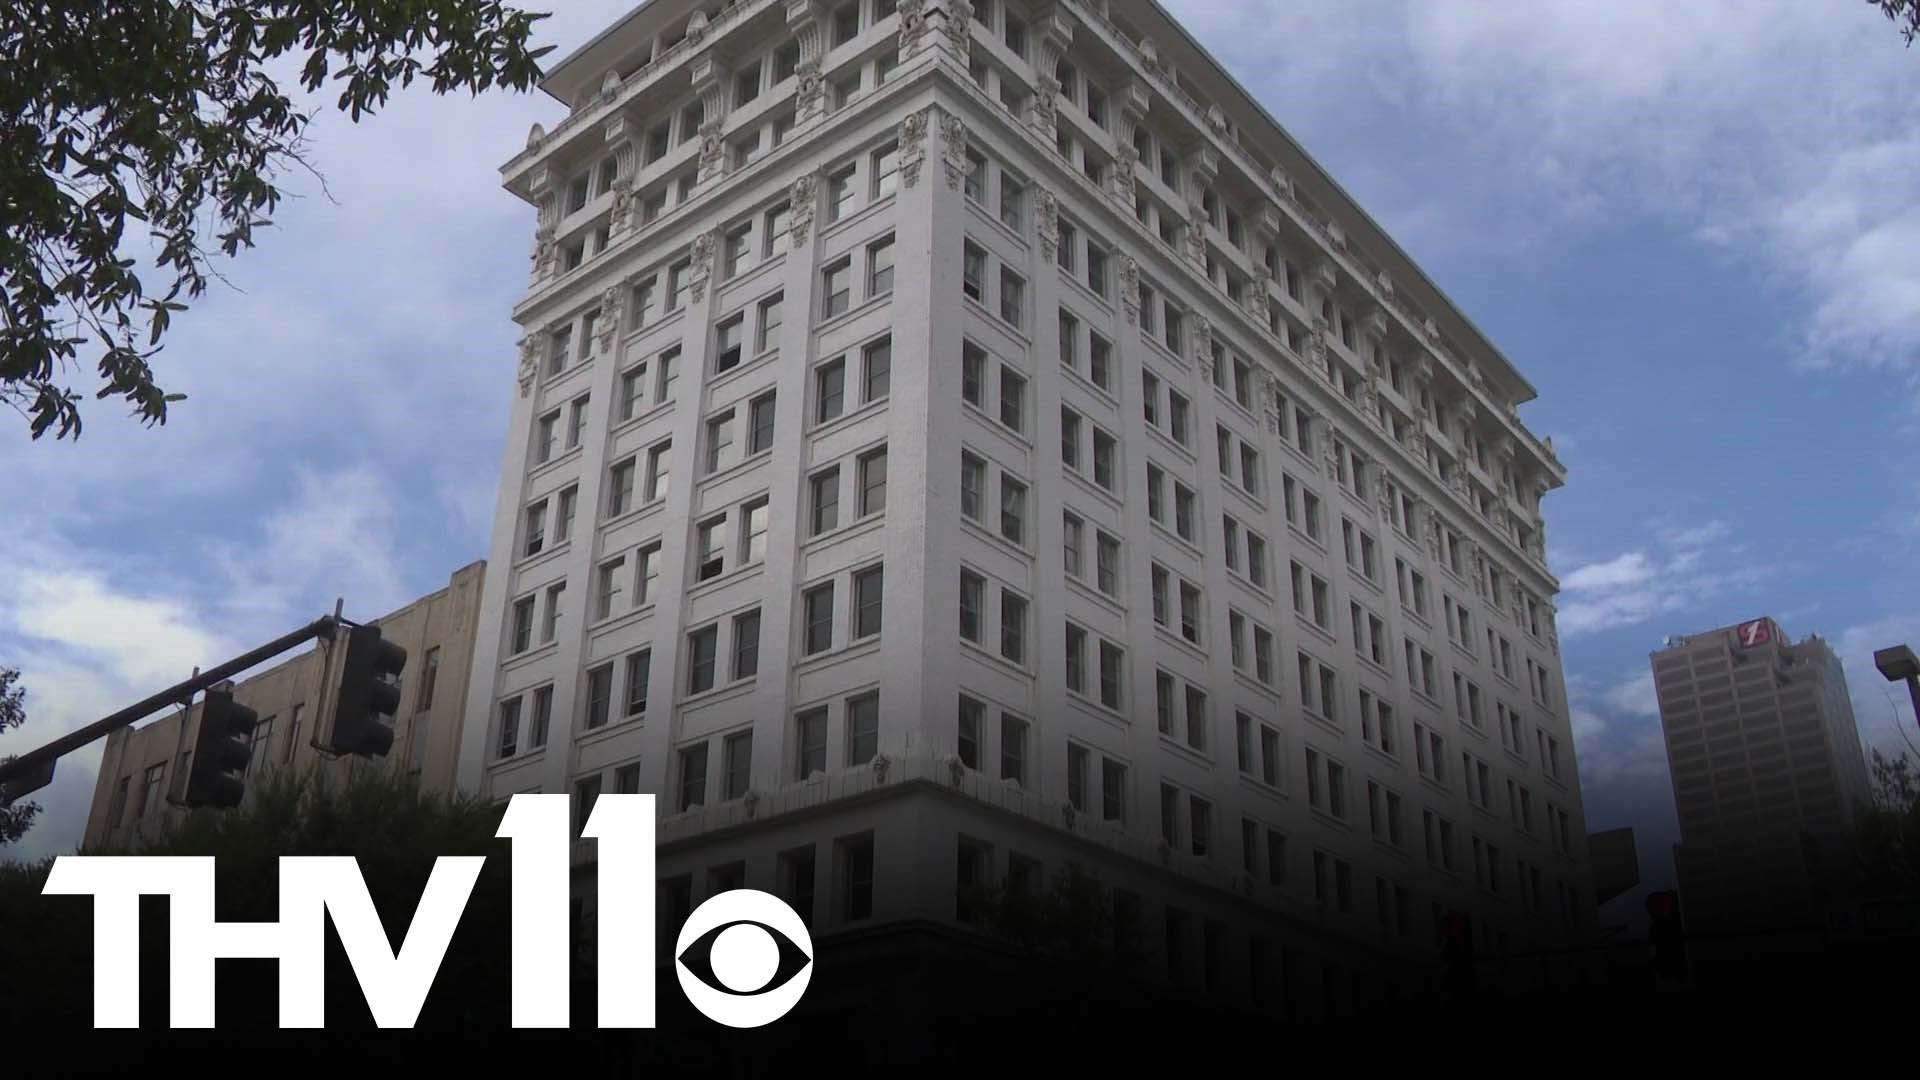 After two decades of sitting empty the Boyle Building in the heart of Downtown will soon be home for growth and development.